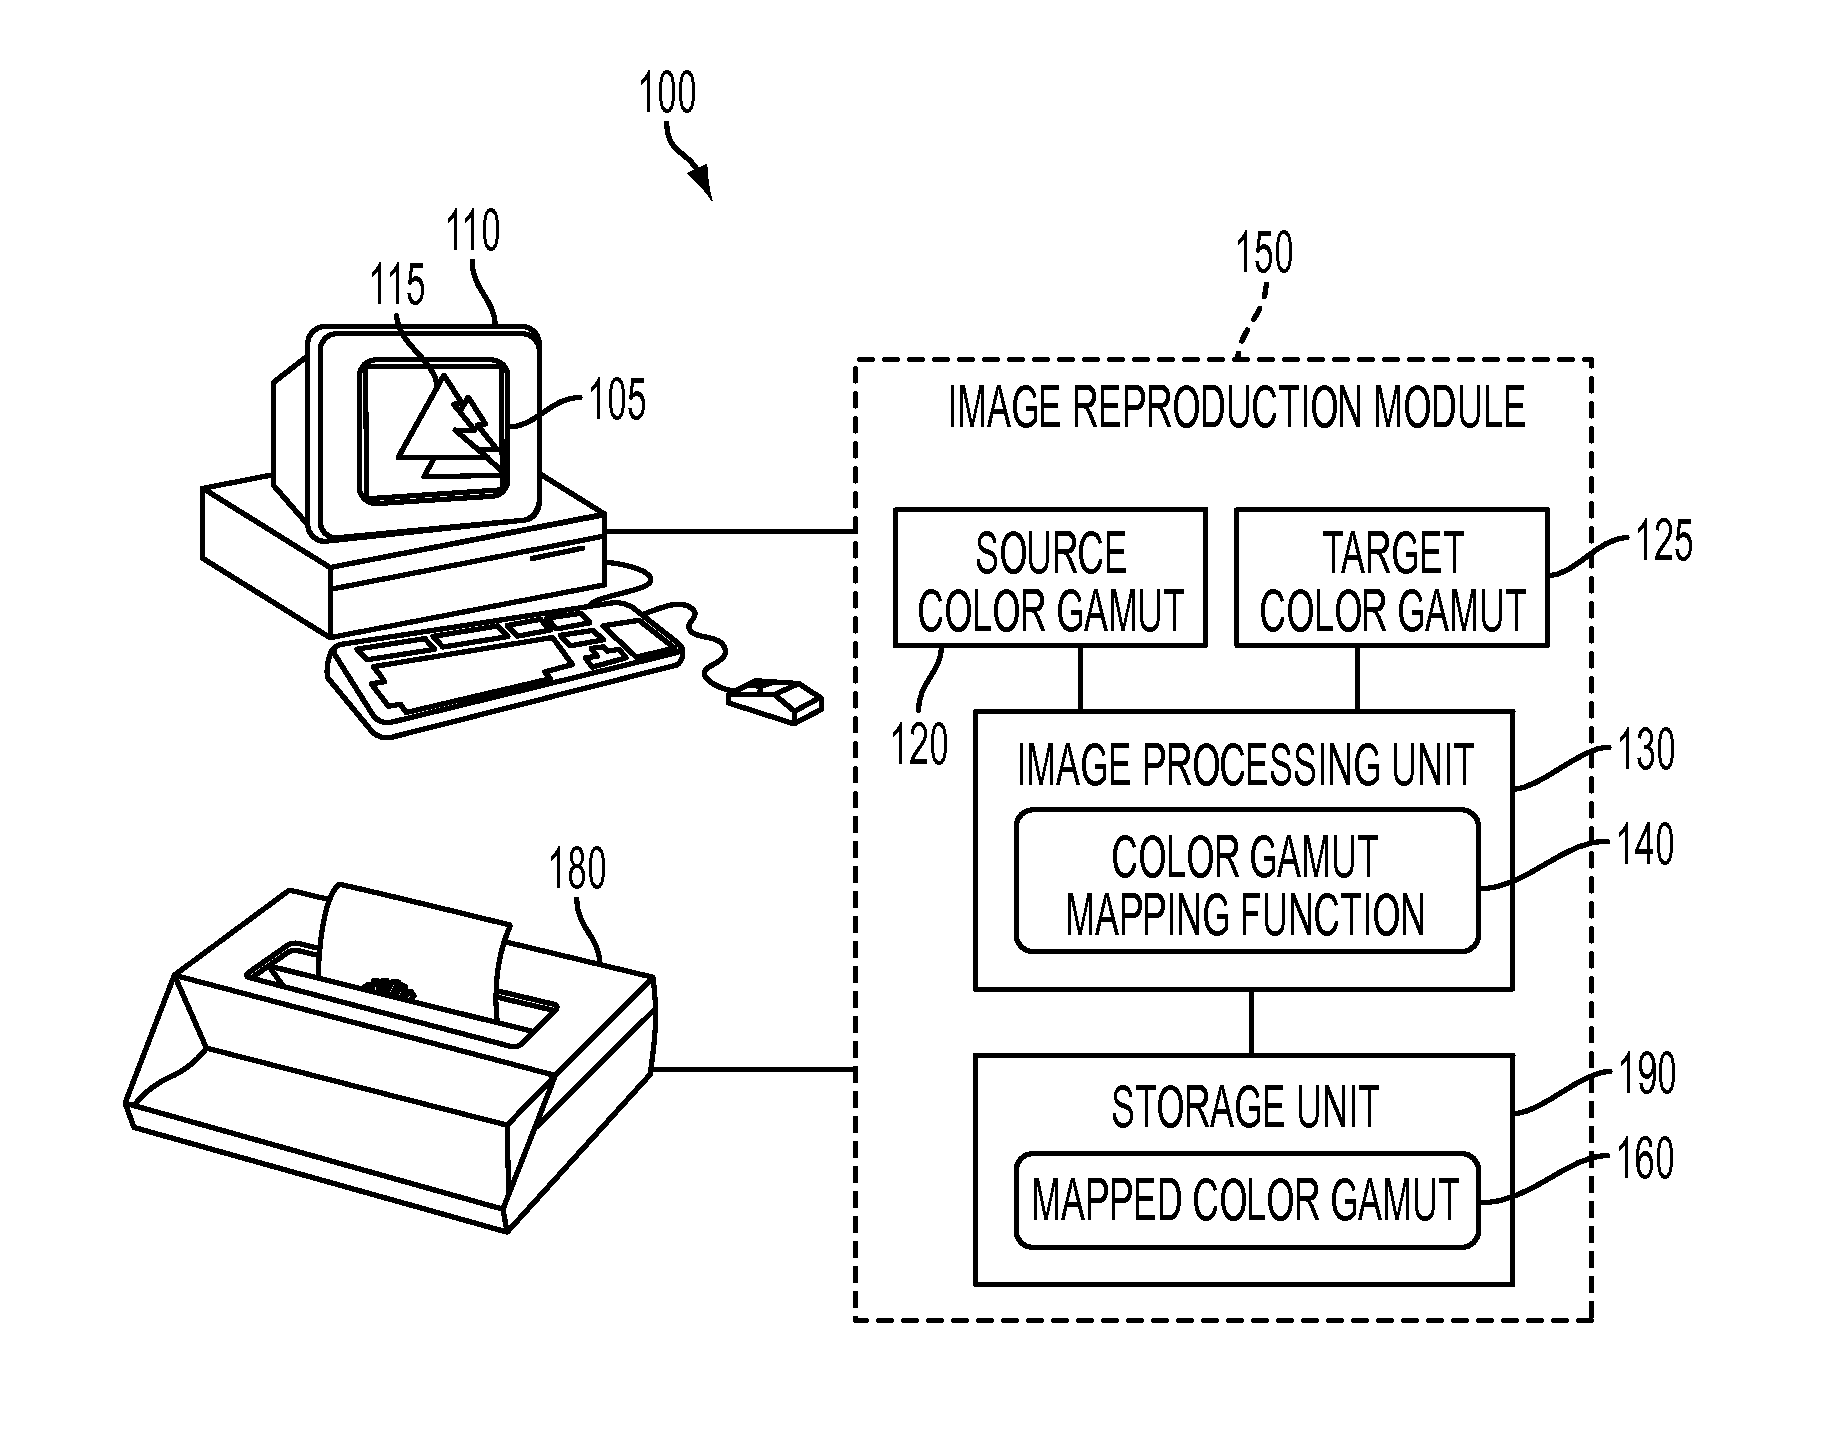 Method and system for partitioning and mapping color gamuts based on one-one and onto mapping function